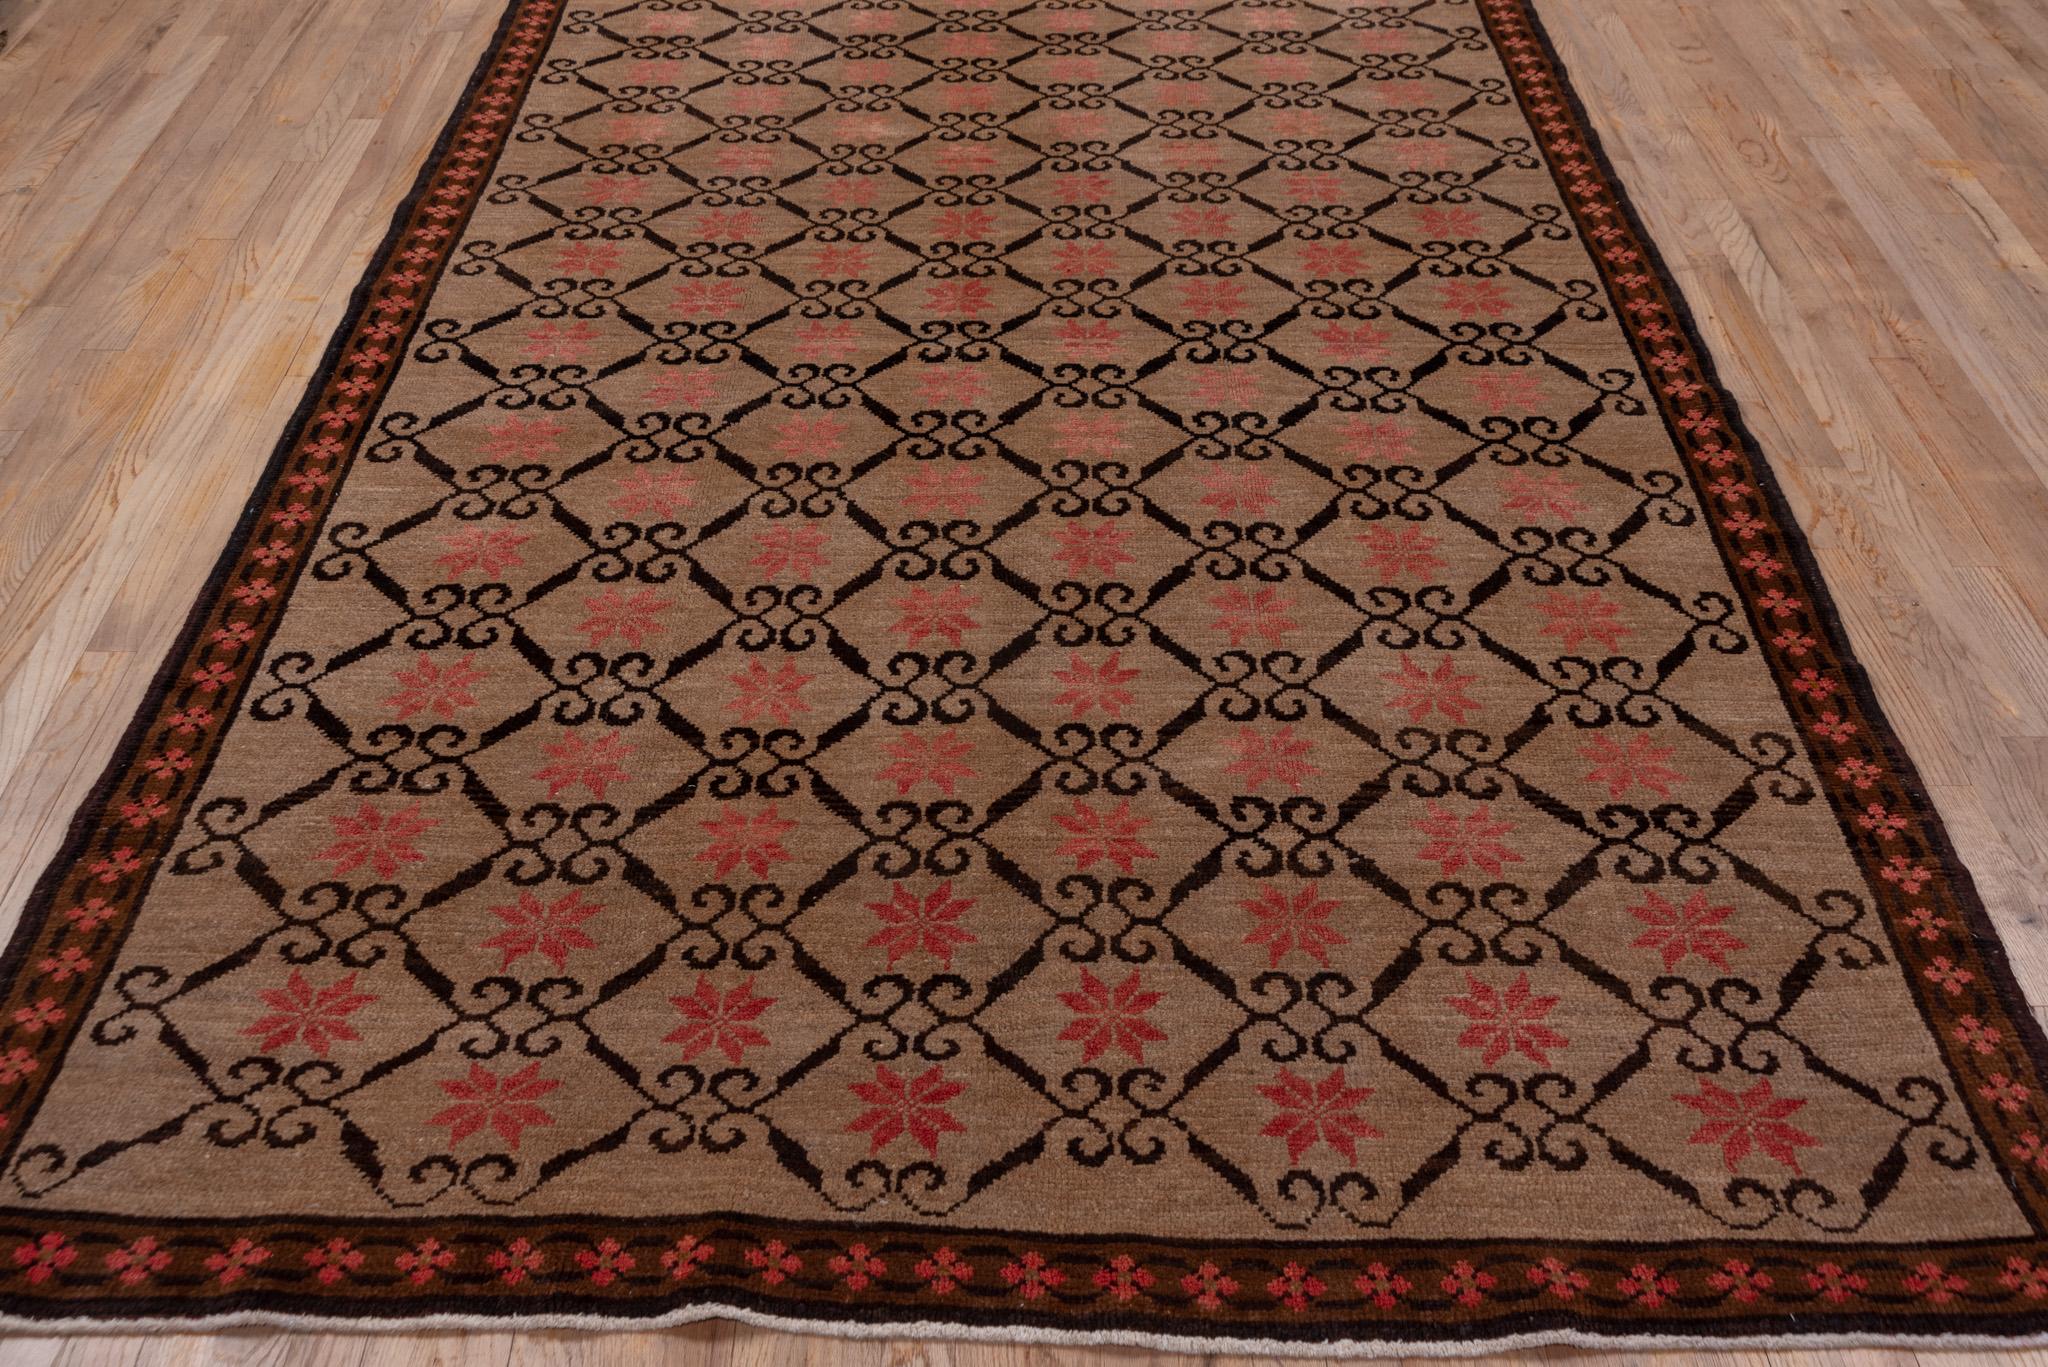 Vintage Turkish Kars rugs, also known as Kars carpets or Kars kilims, are a type of traditional handwoven rug originating from the city of Kars in northeastern Turkey. These rugs have a rich history dating back several centuries and are highly